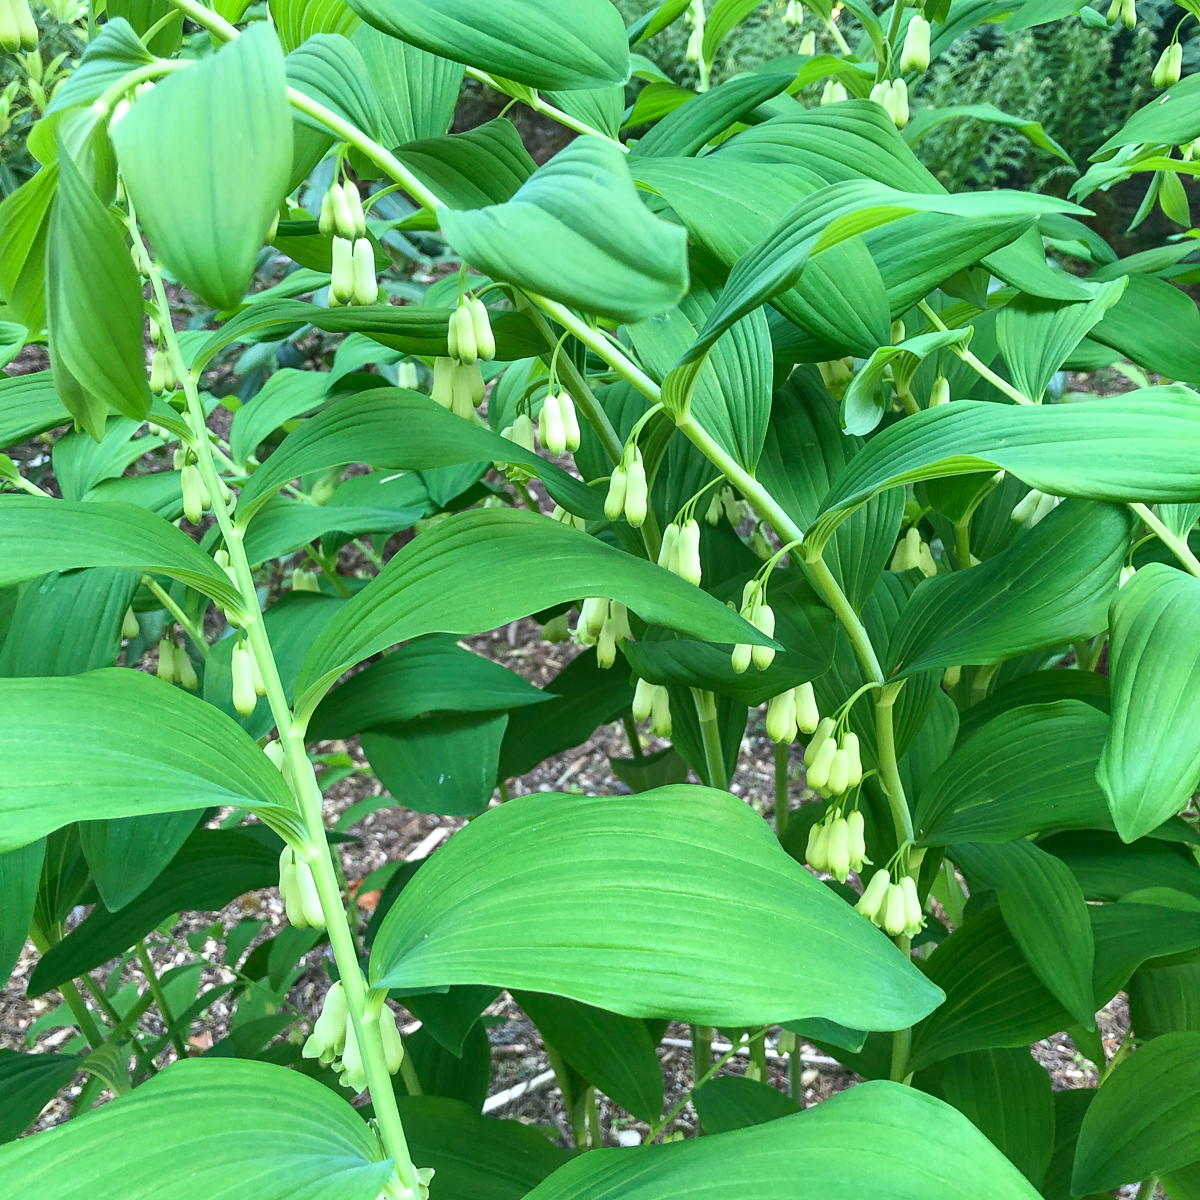 Solomon's seal plants with flowers